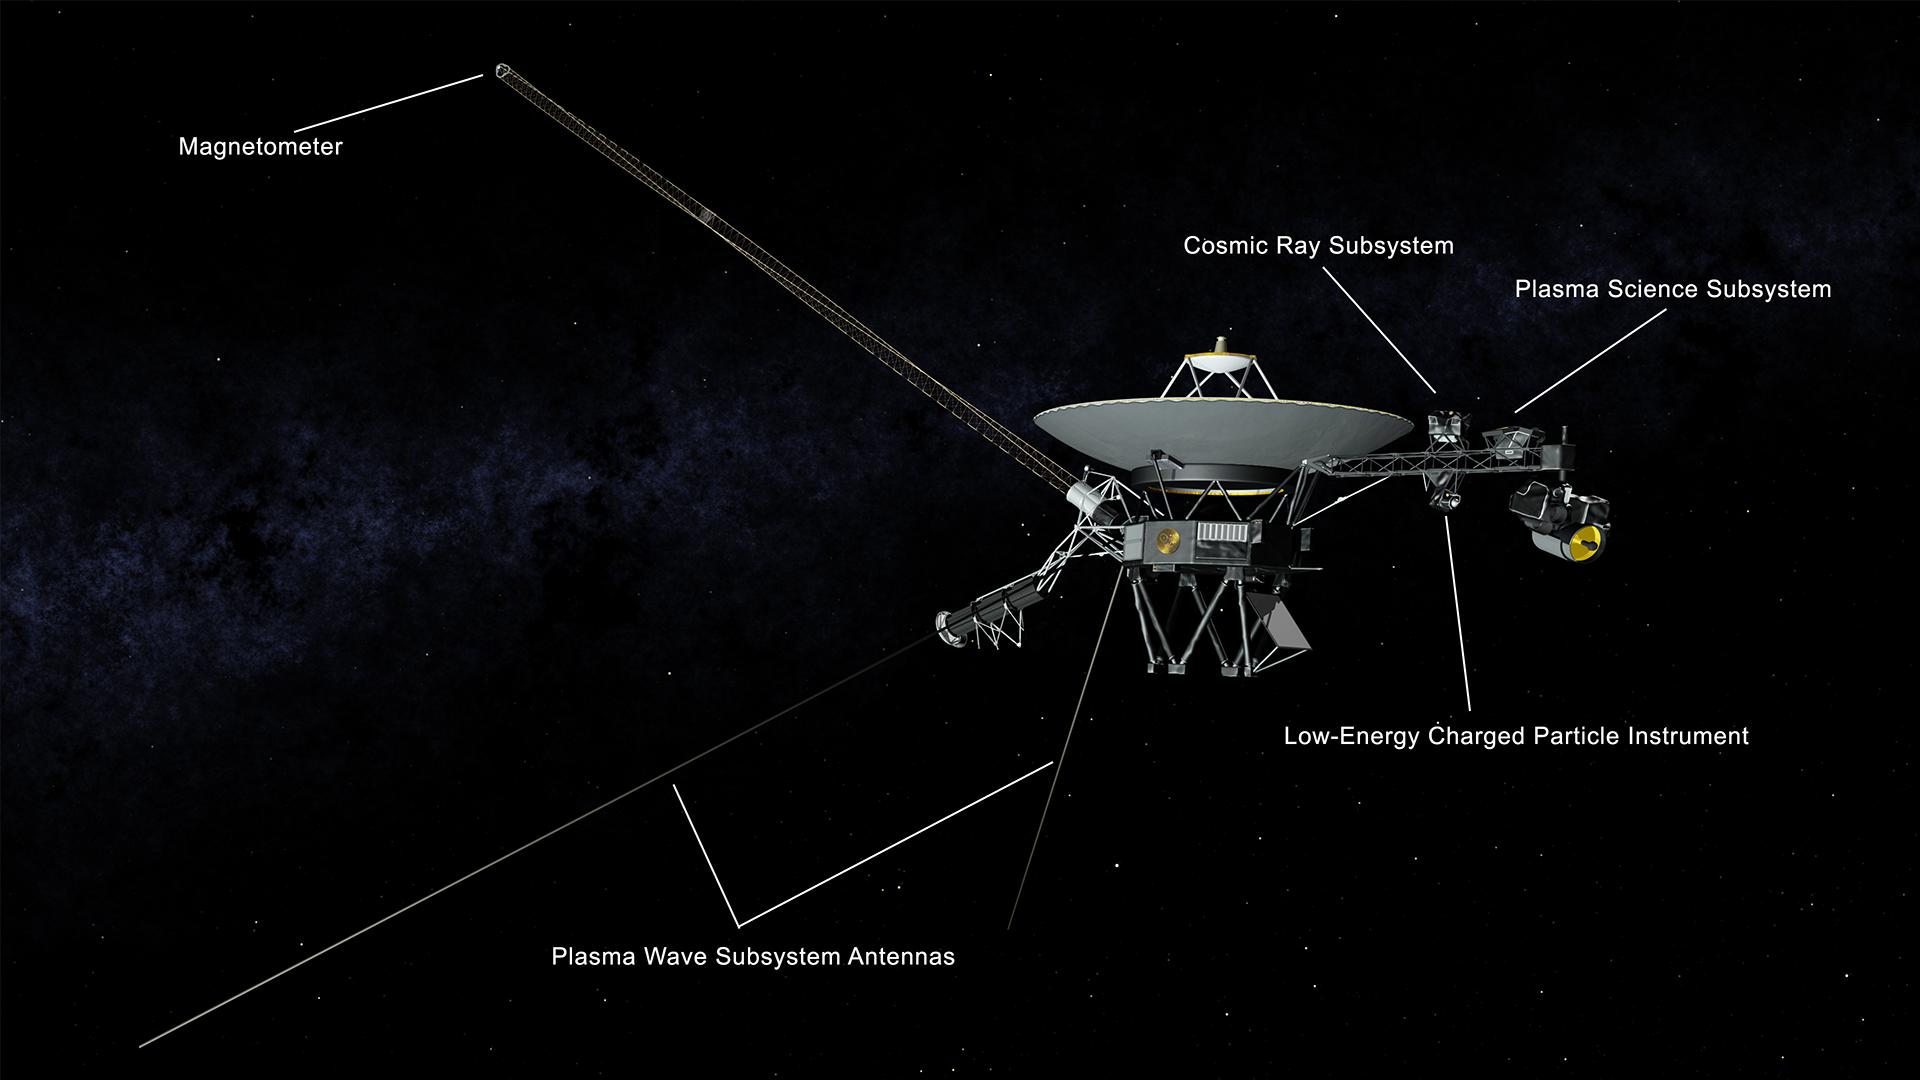 An illustration shows NASA's Voyager spacecraft in space against a black background. Labels point out the locations of the spacecraft’s magnetometer, the cosmic ray subsystem, plasma science subsystem, low-energy charged particle instrument, and plasma wave subsystem antennas.